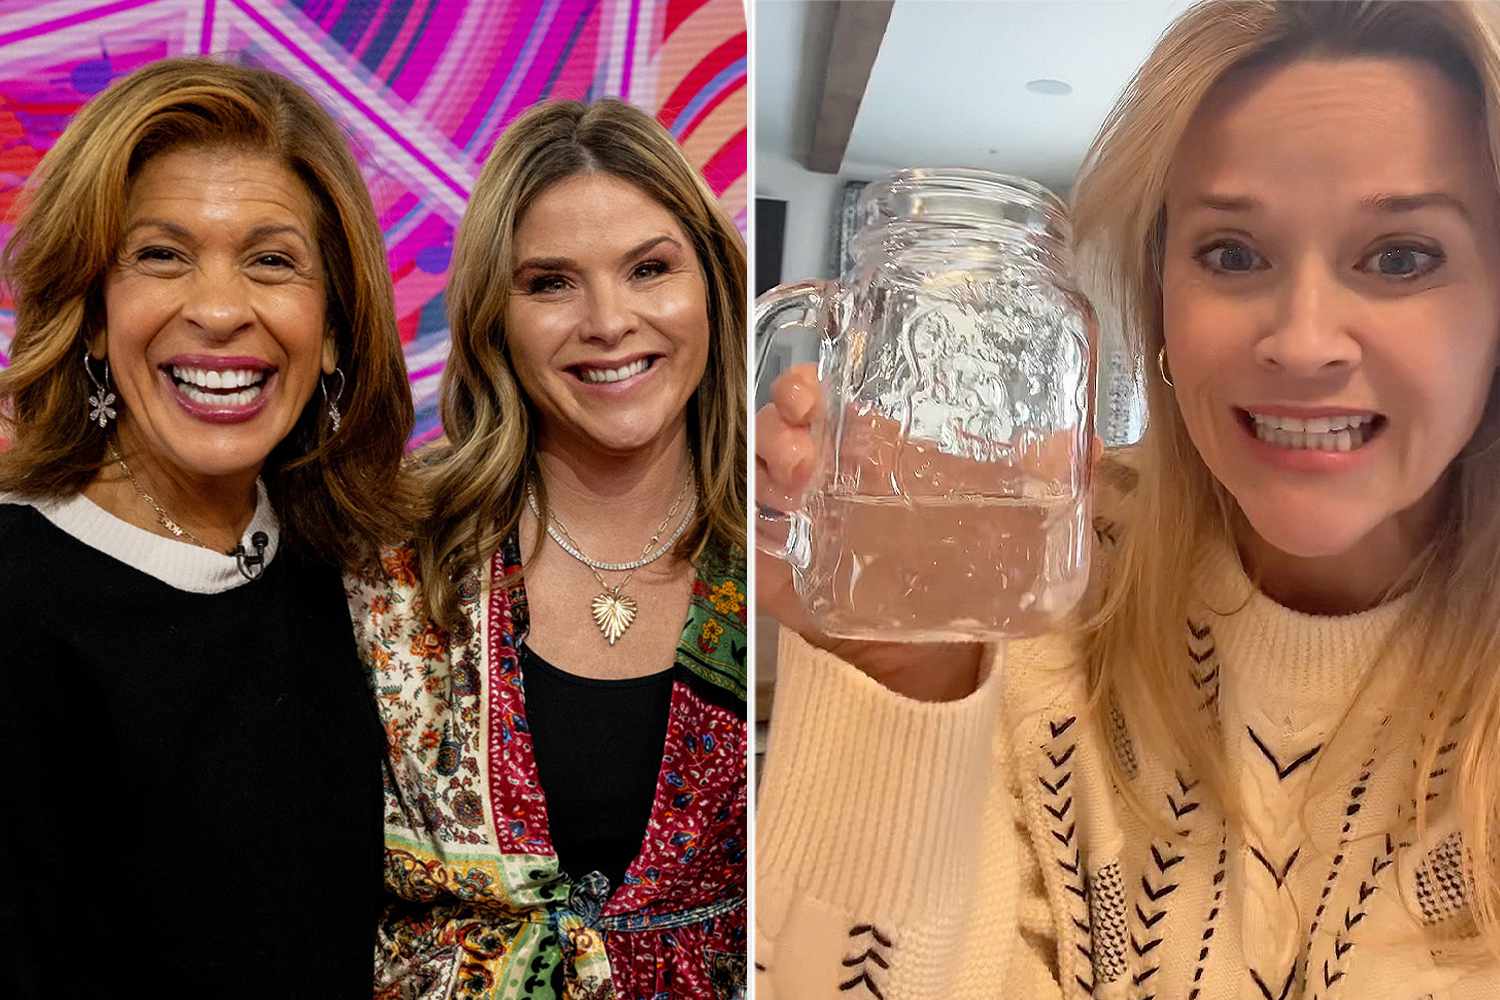 Hoda Kotb and Jenna Bush Reveal Laura Bush's 'Snow Ice Cream' Recipe While Defending Reese Witherspoon for Eating Snow